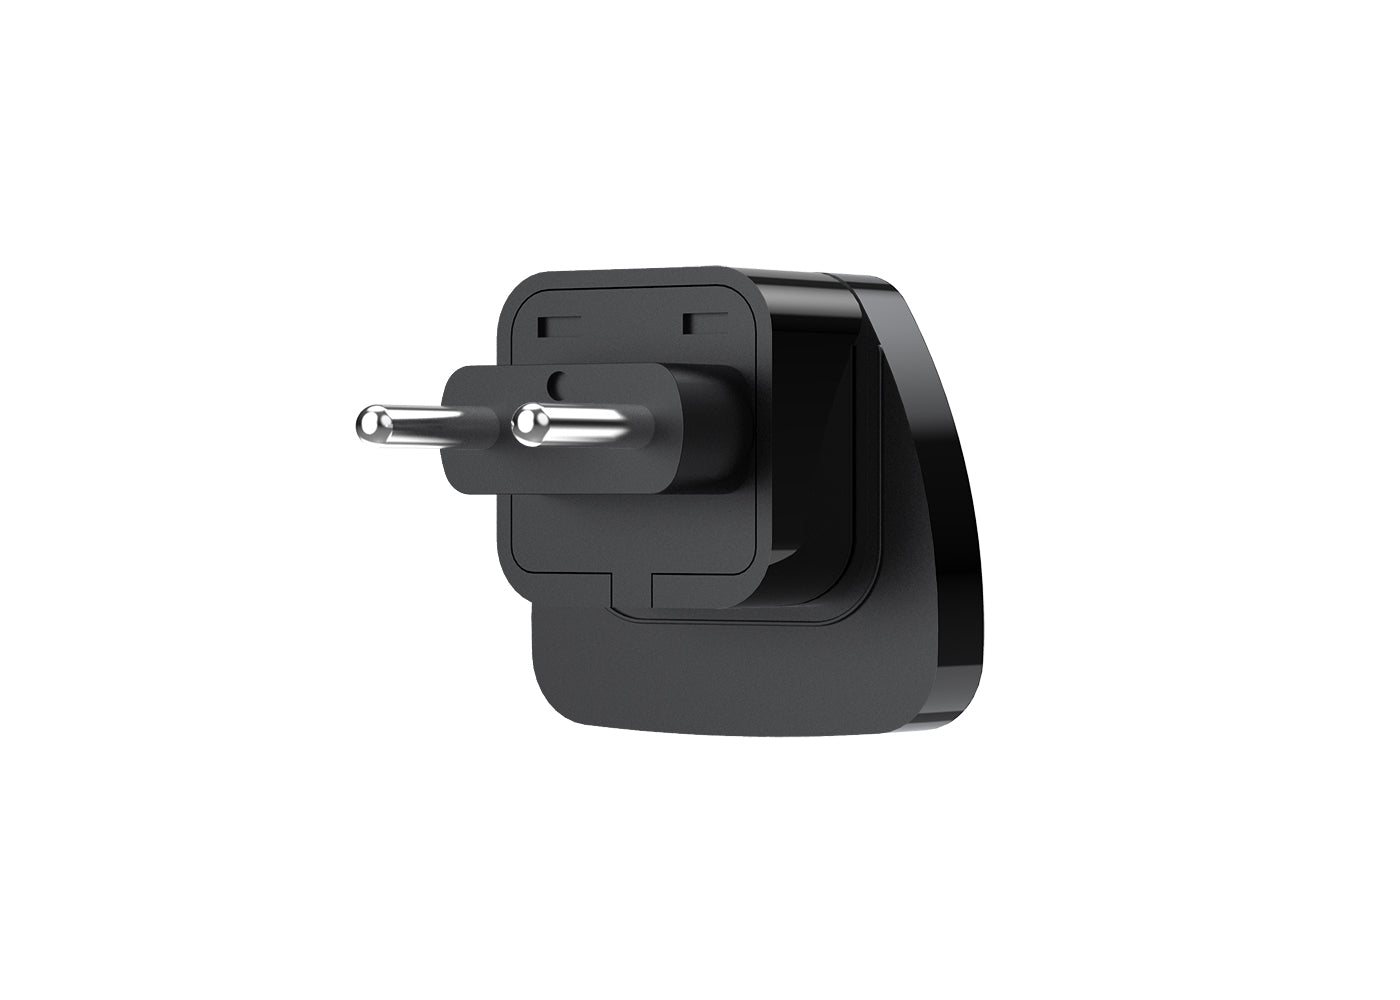 Universal Power Adapter for Europe (Small)